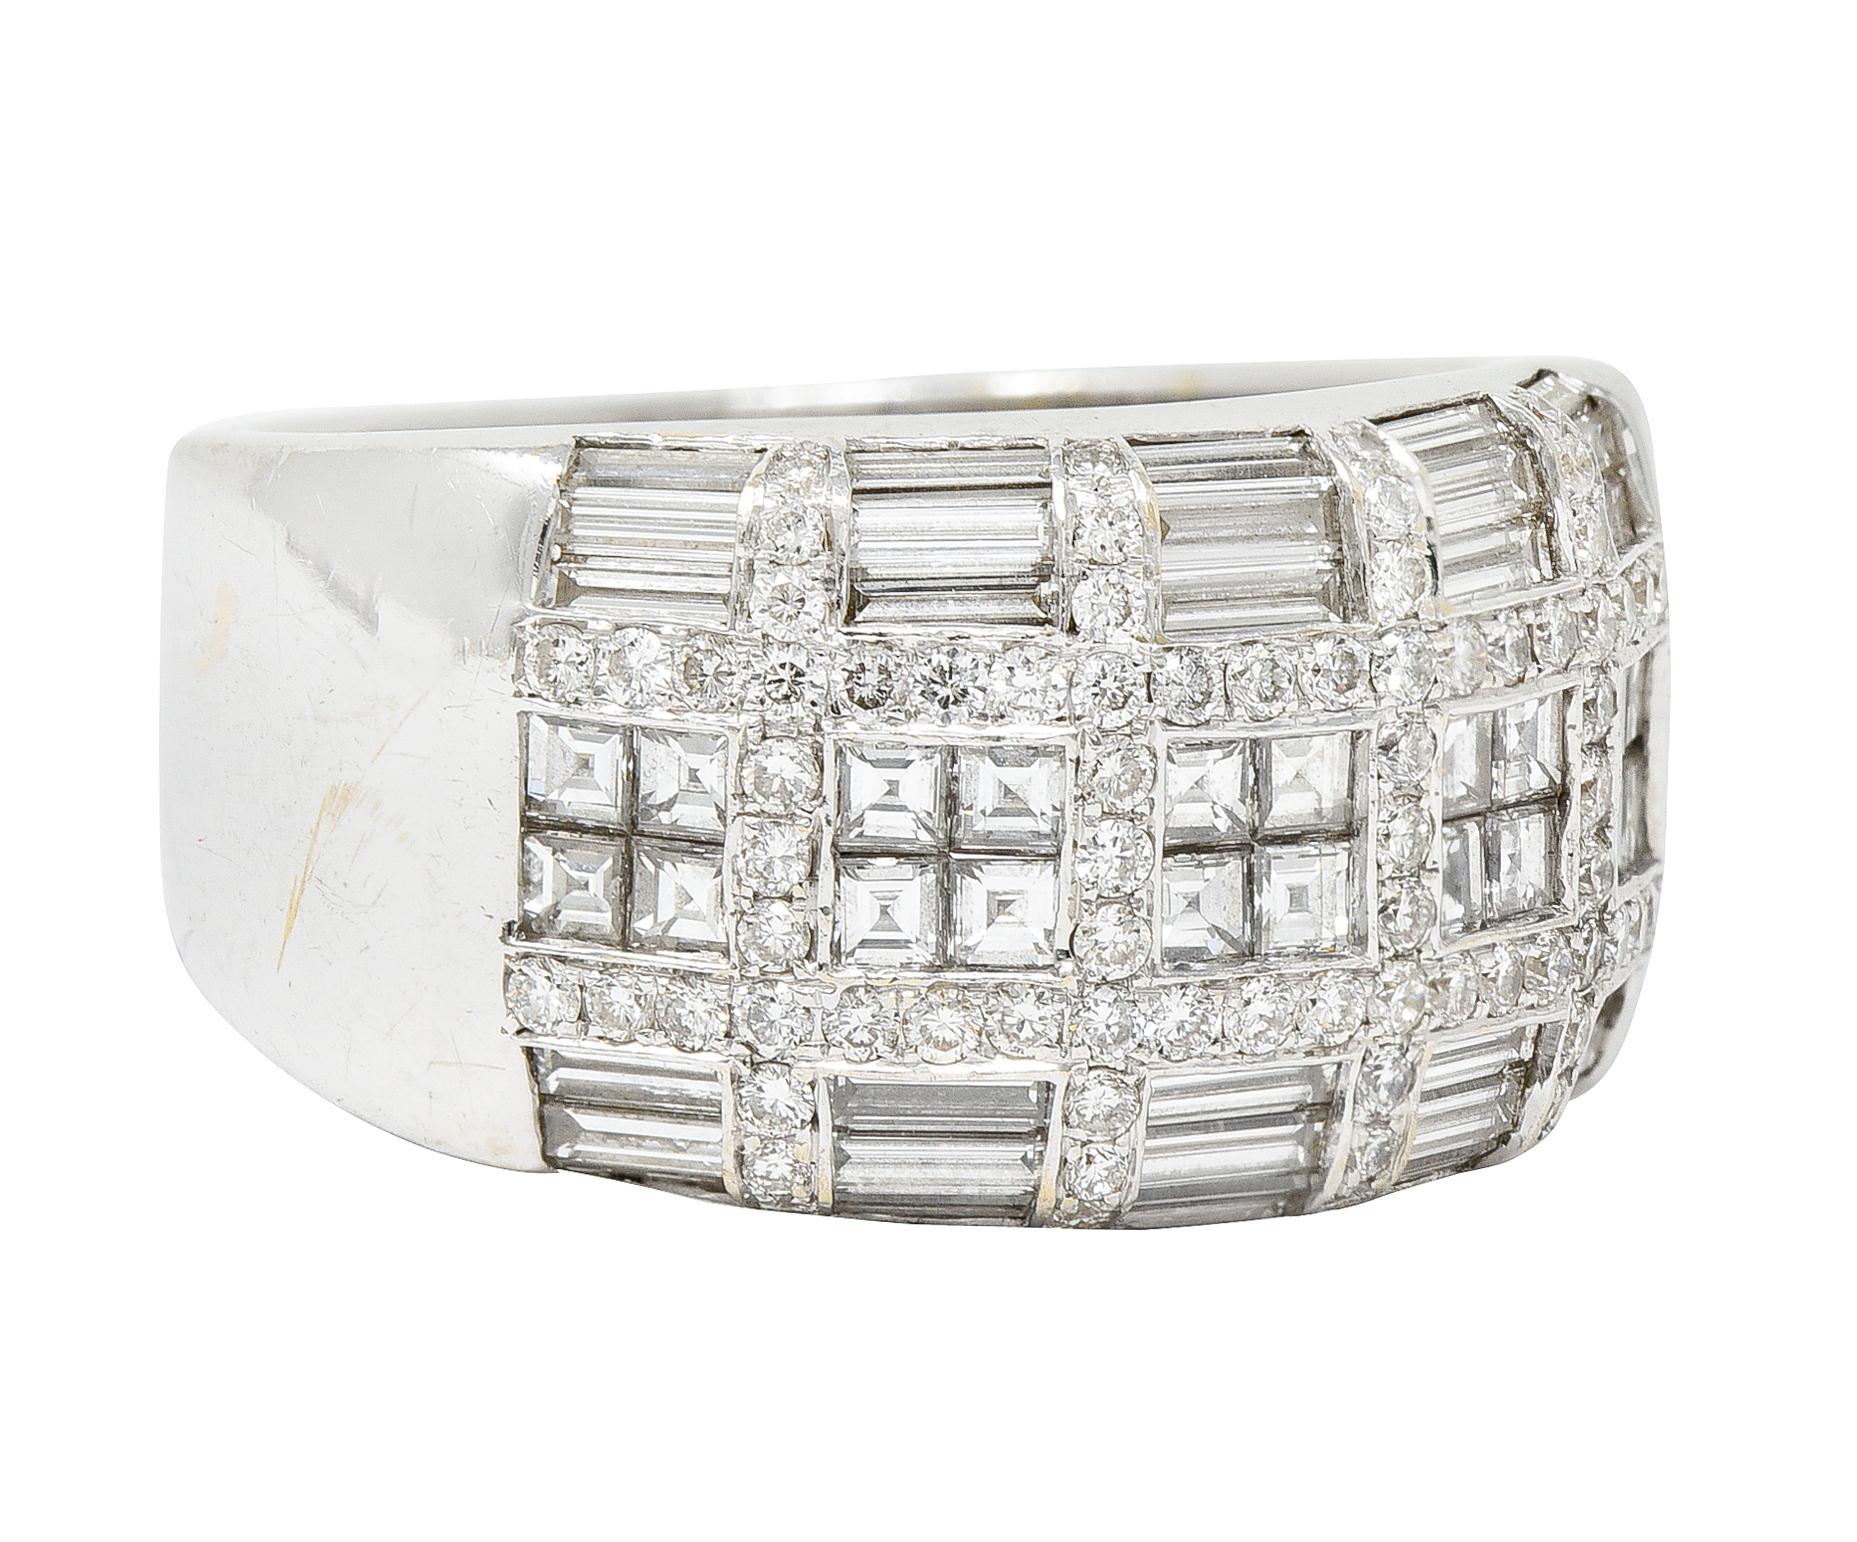 Wide band ring features a front facing grid-like motif comprised of diamonds

Baguette cut diamonds are channel set while square step diamonds are mystery set

With round brilliant cut diamond accents throughout

Total diamond weight is